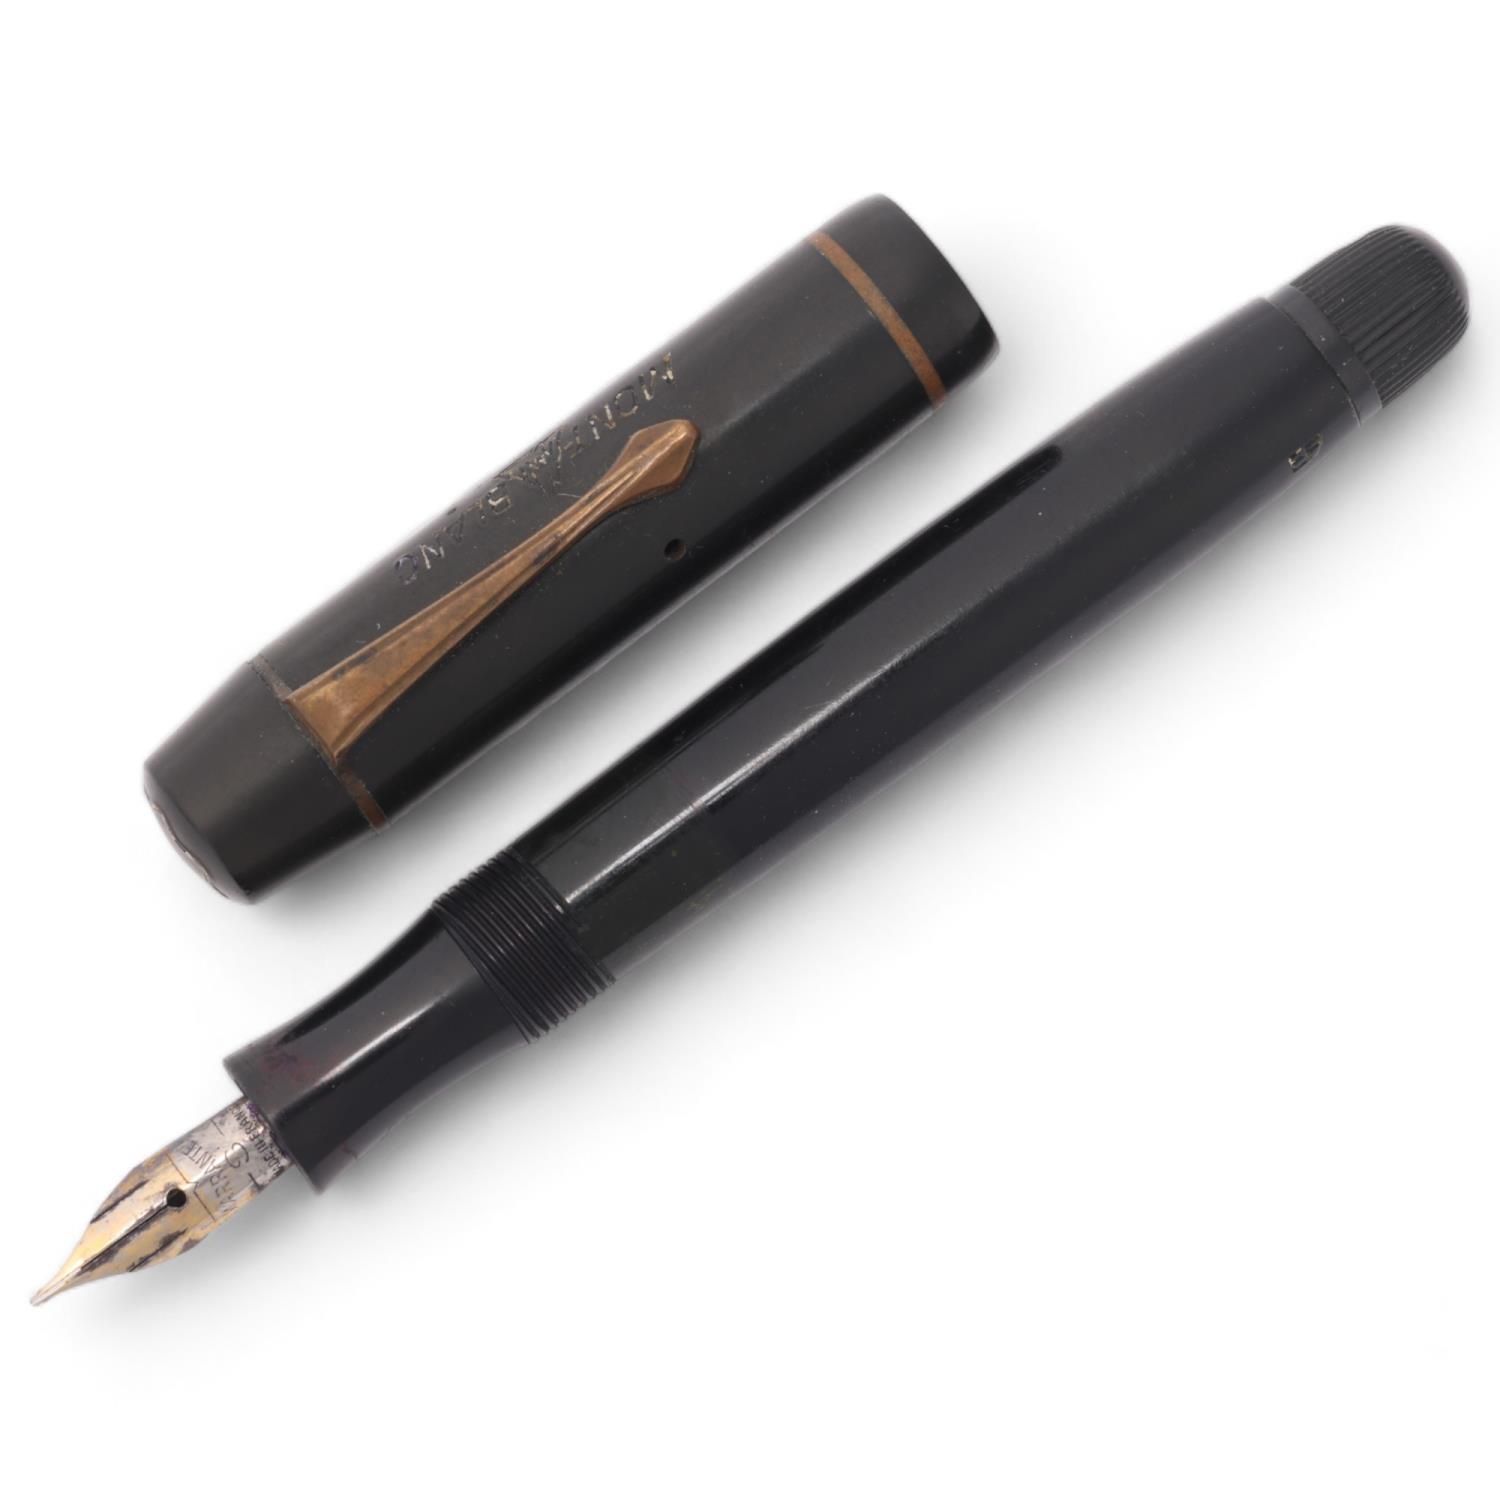 A vintage Montblanc 332 fountain pen, piston fill, makers mark to cap Replacement nib, otherwise